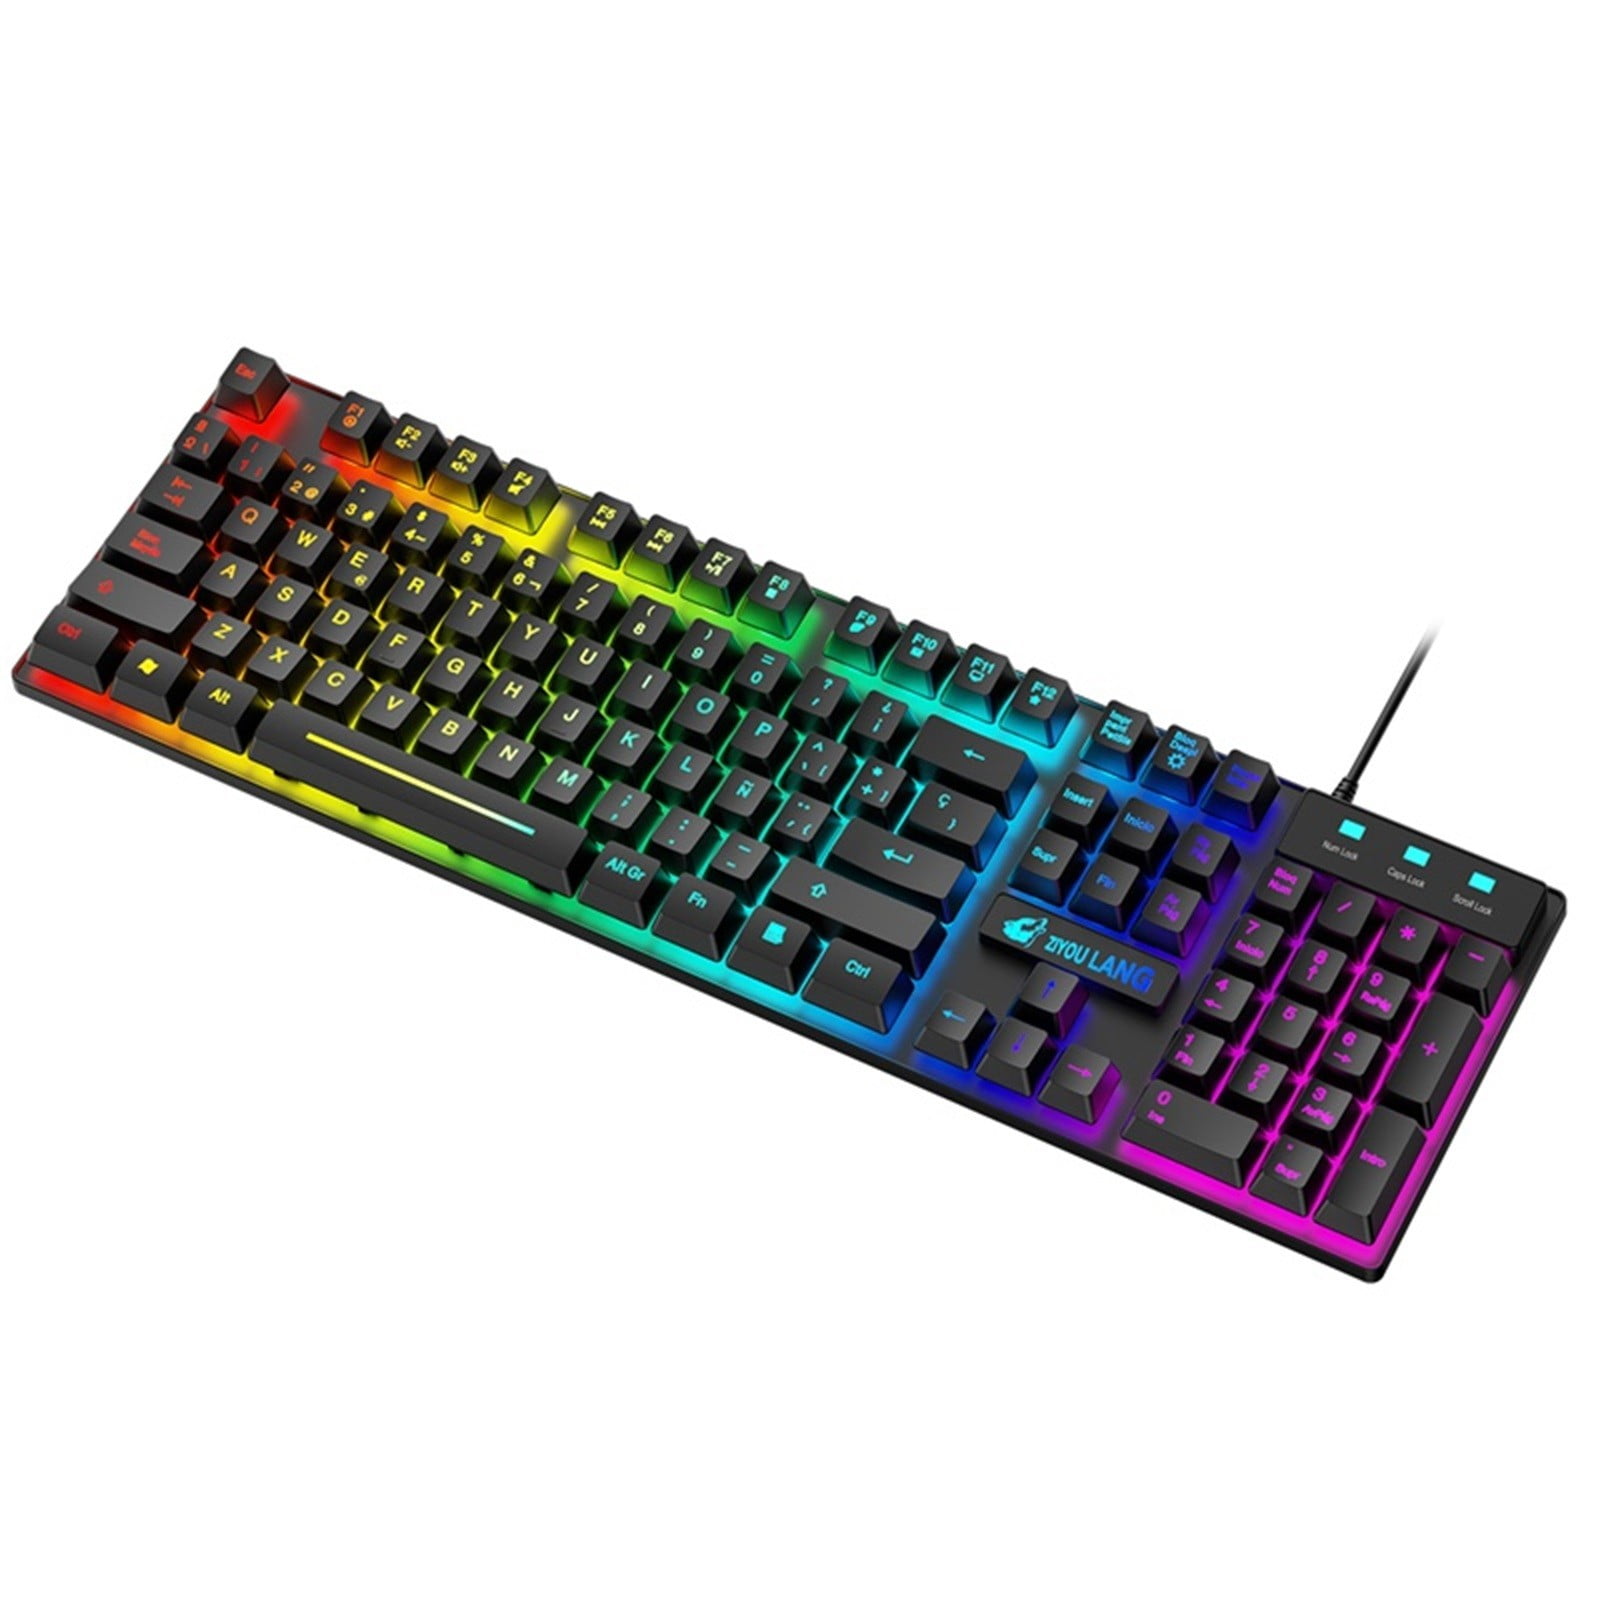 Bowake T13 RGB Spanish Gaming Keyboard And Mouse With 104-key Backlit  QWERTY Keyboard | Nummernblöcke